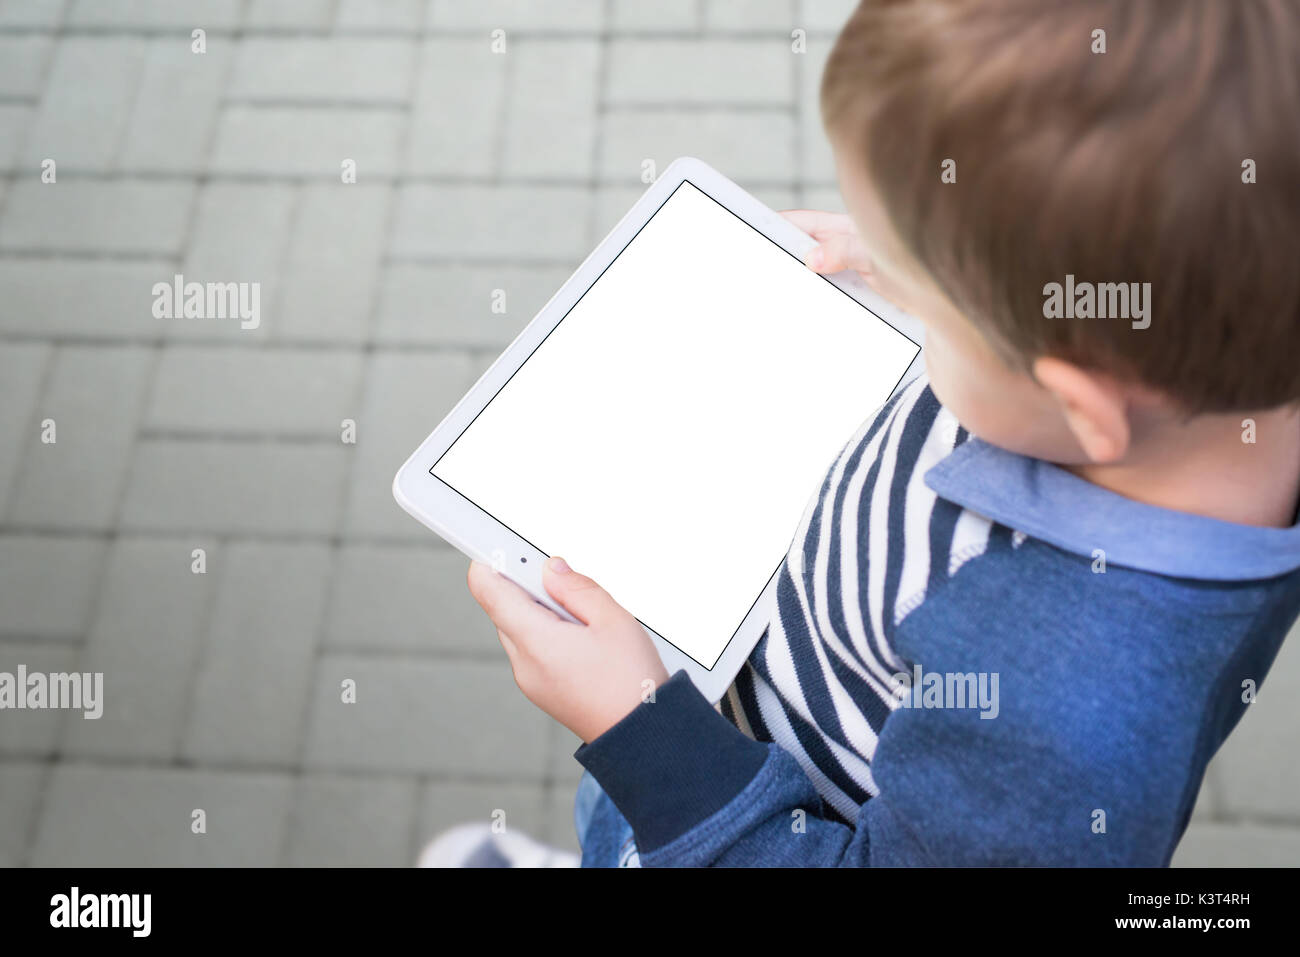 Boy holding tablet on city street. Device with isolated screen for mockup, template, product presentation. Stock Photo